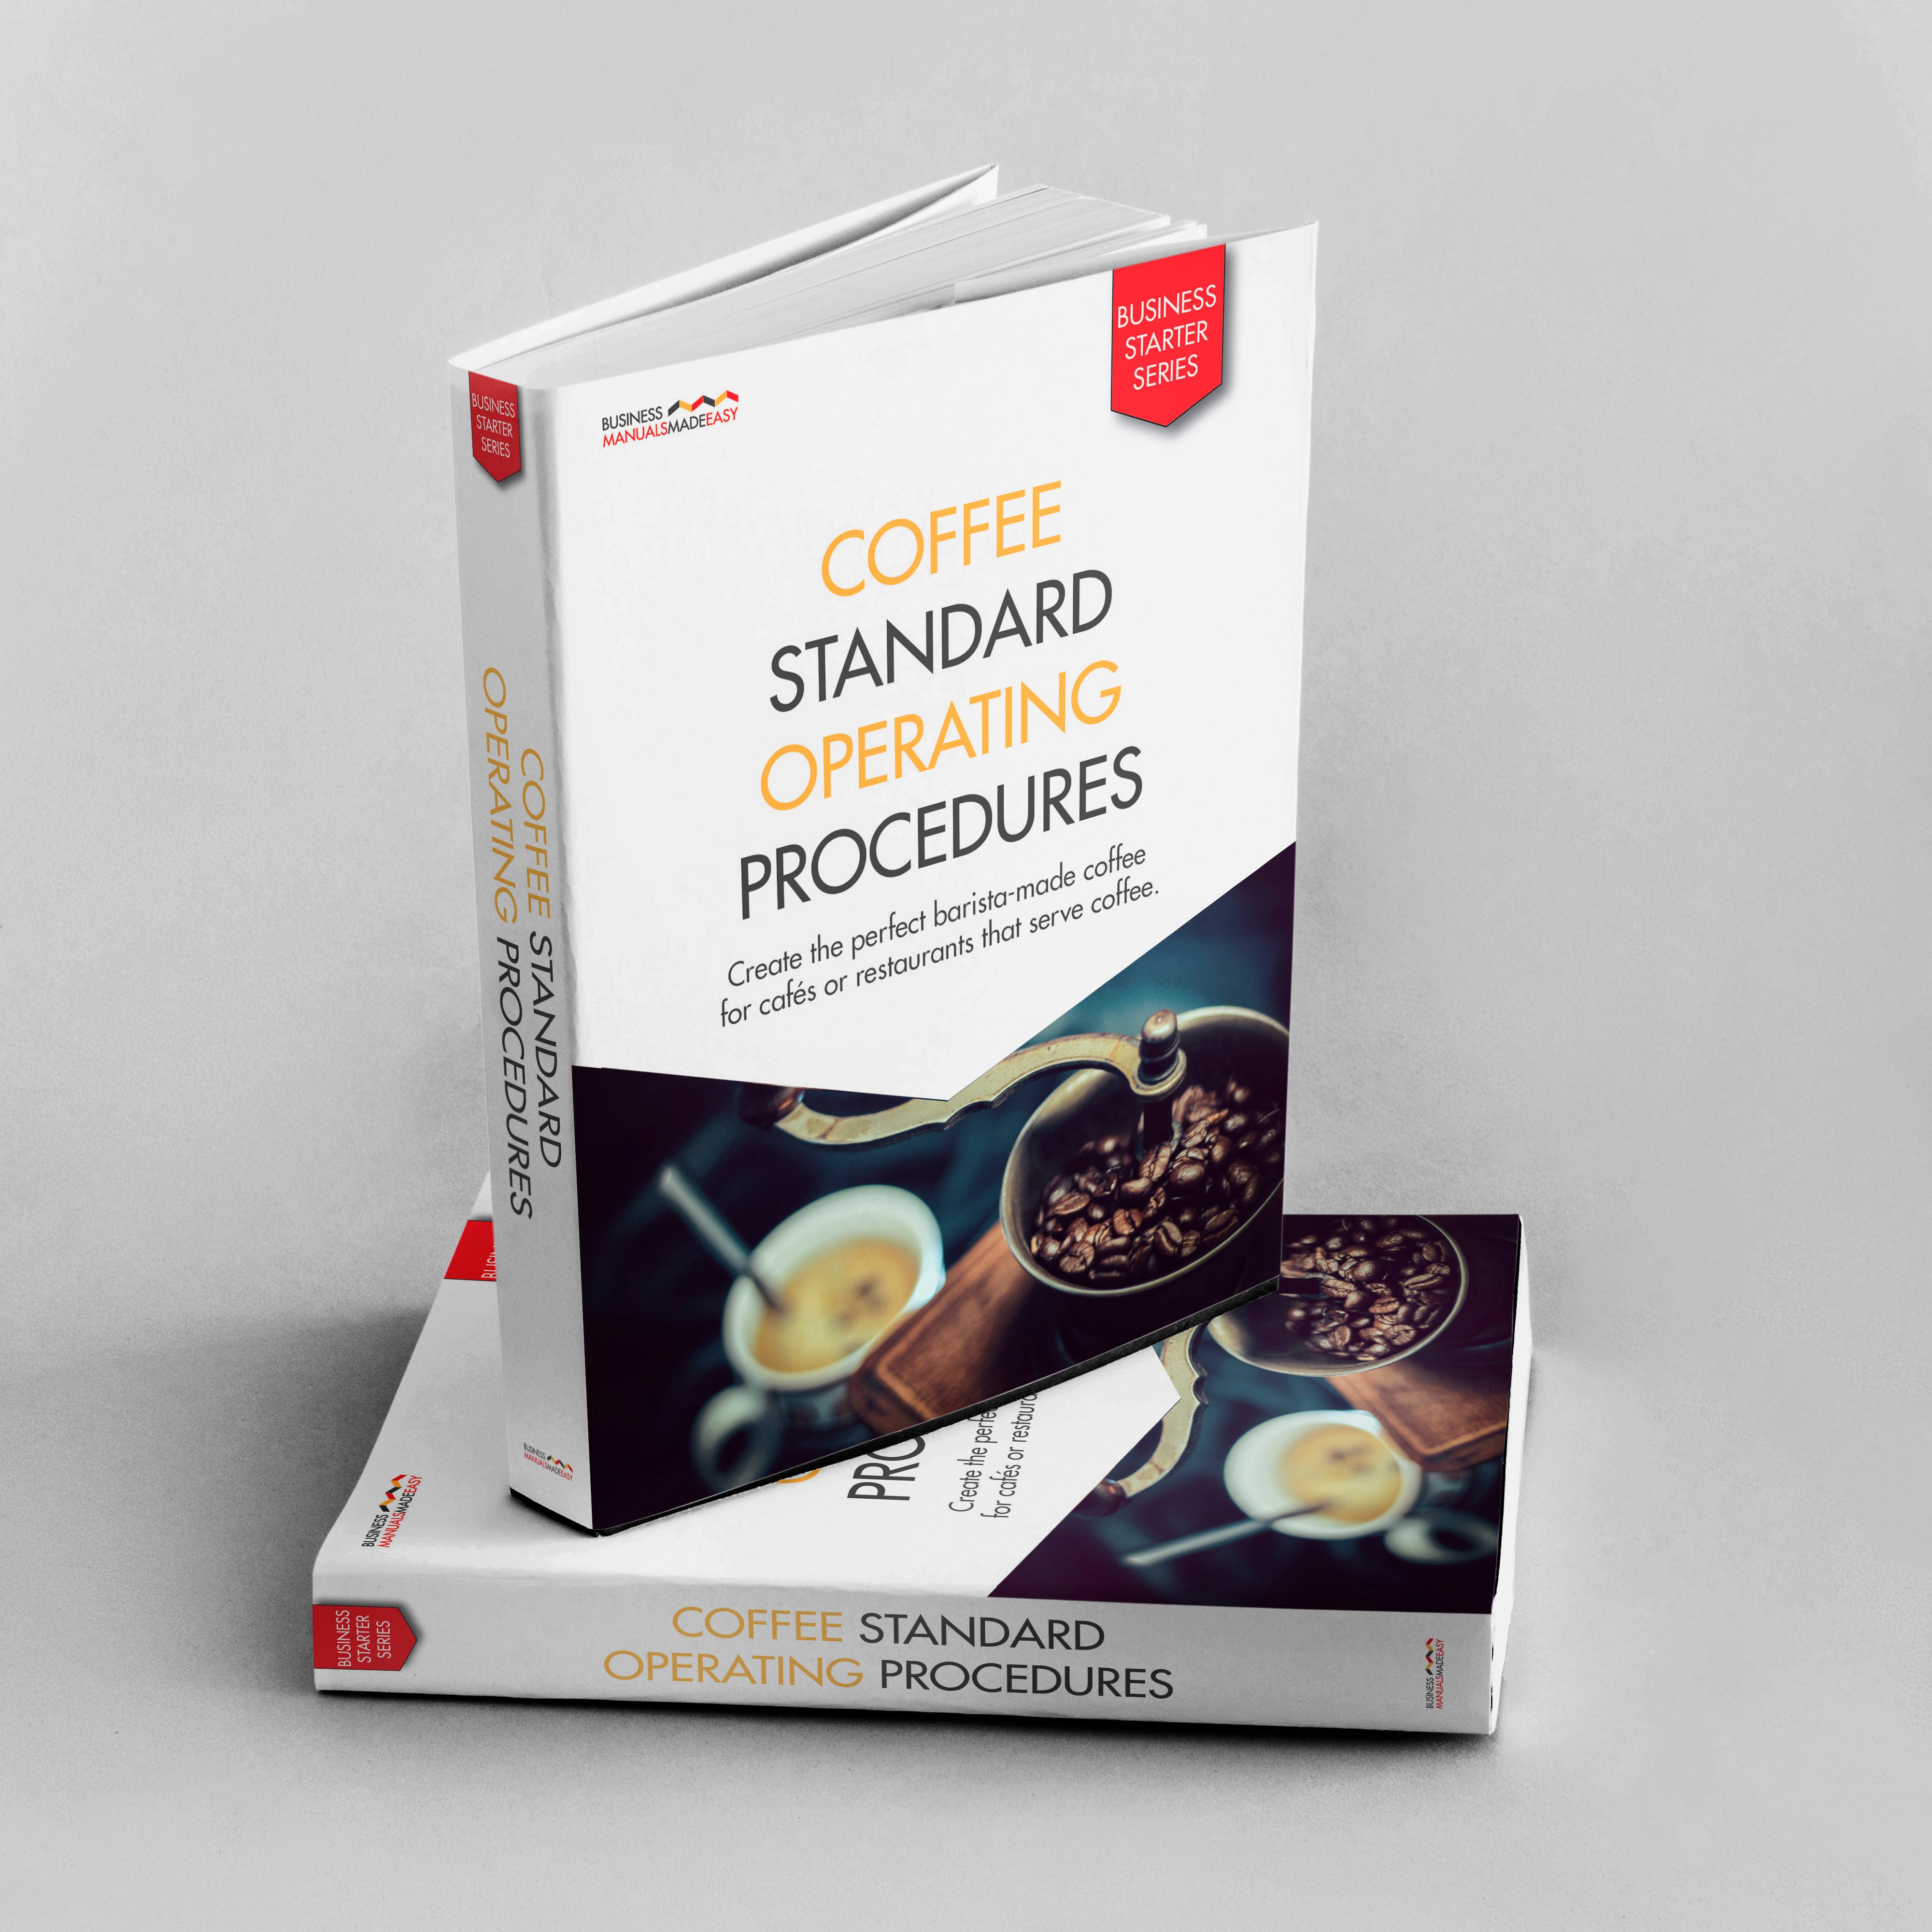 Business Manuals Made Easy - Coffee Standard Operating Procedures - All you need to know about making coffee - from grinding and brewing the beans to pulling the perfect espresso.